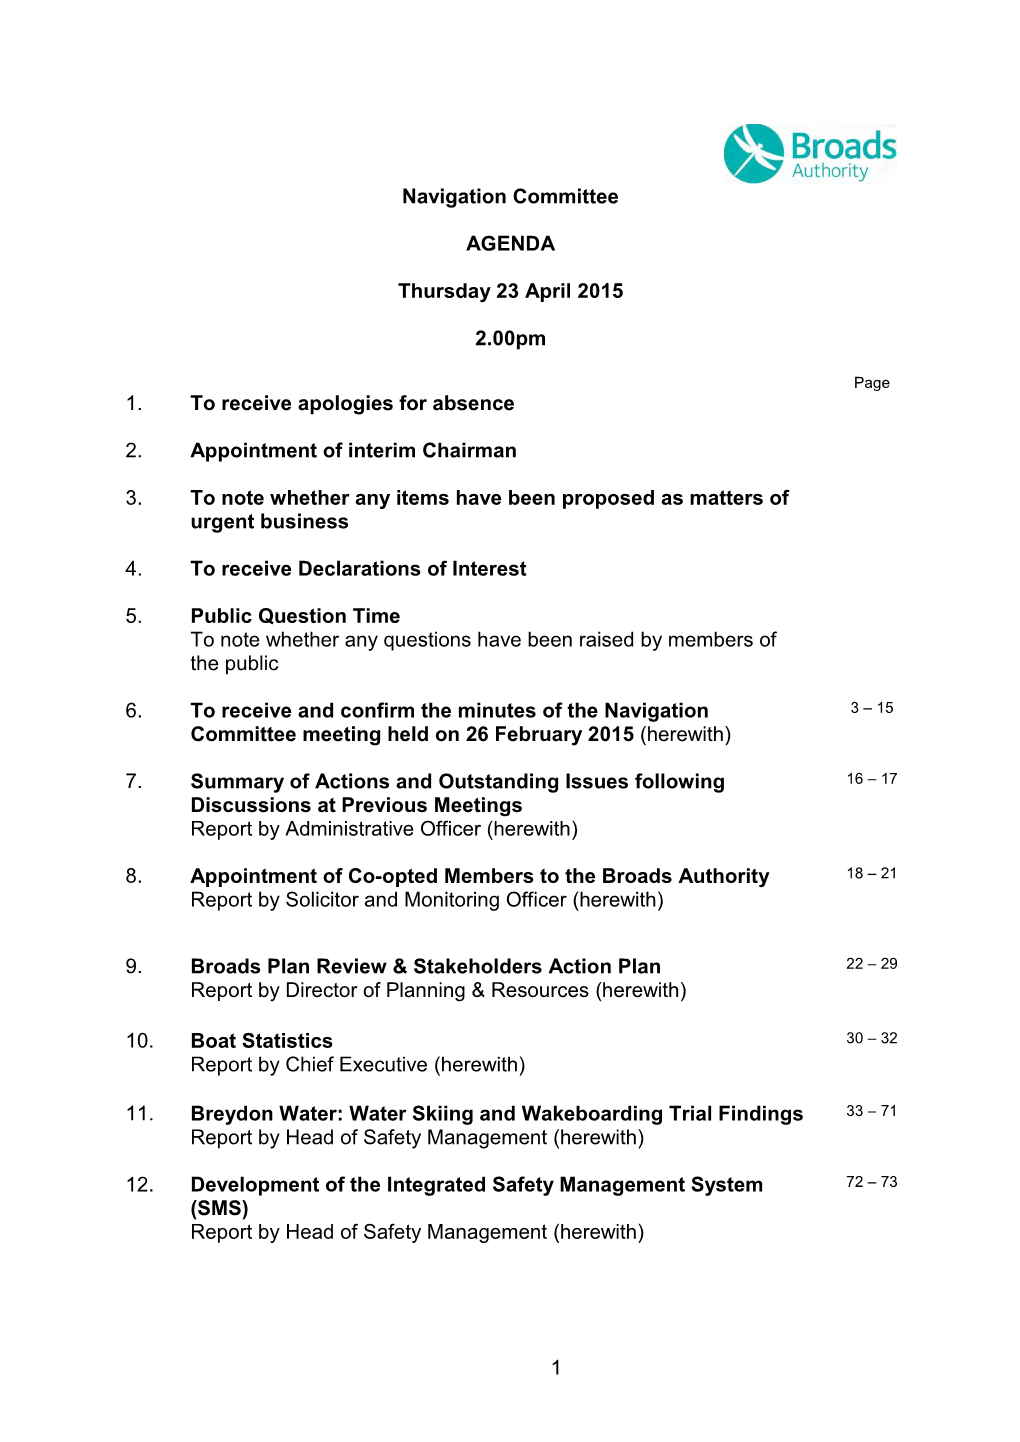 Navigation Committee Agenda and Reports in Full